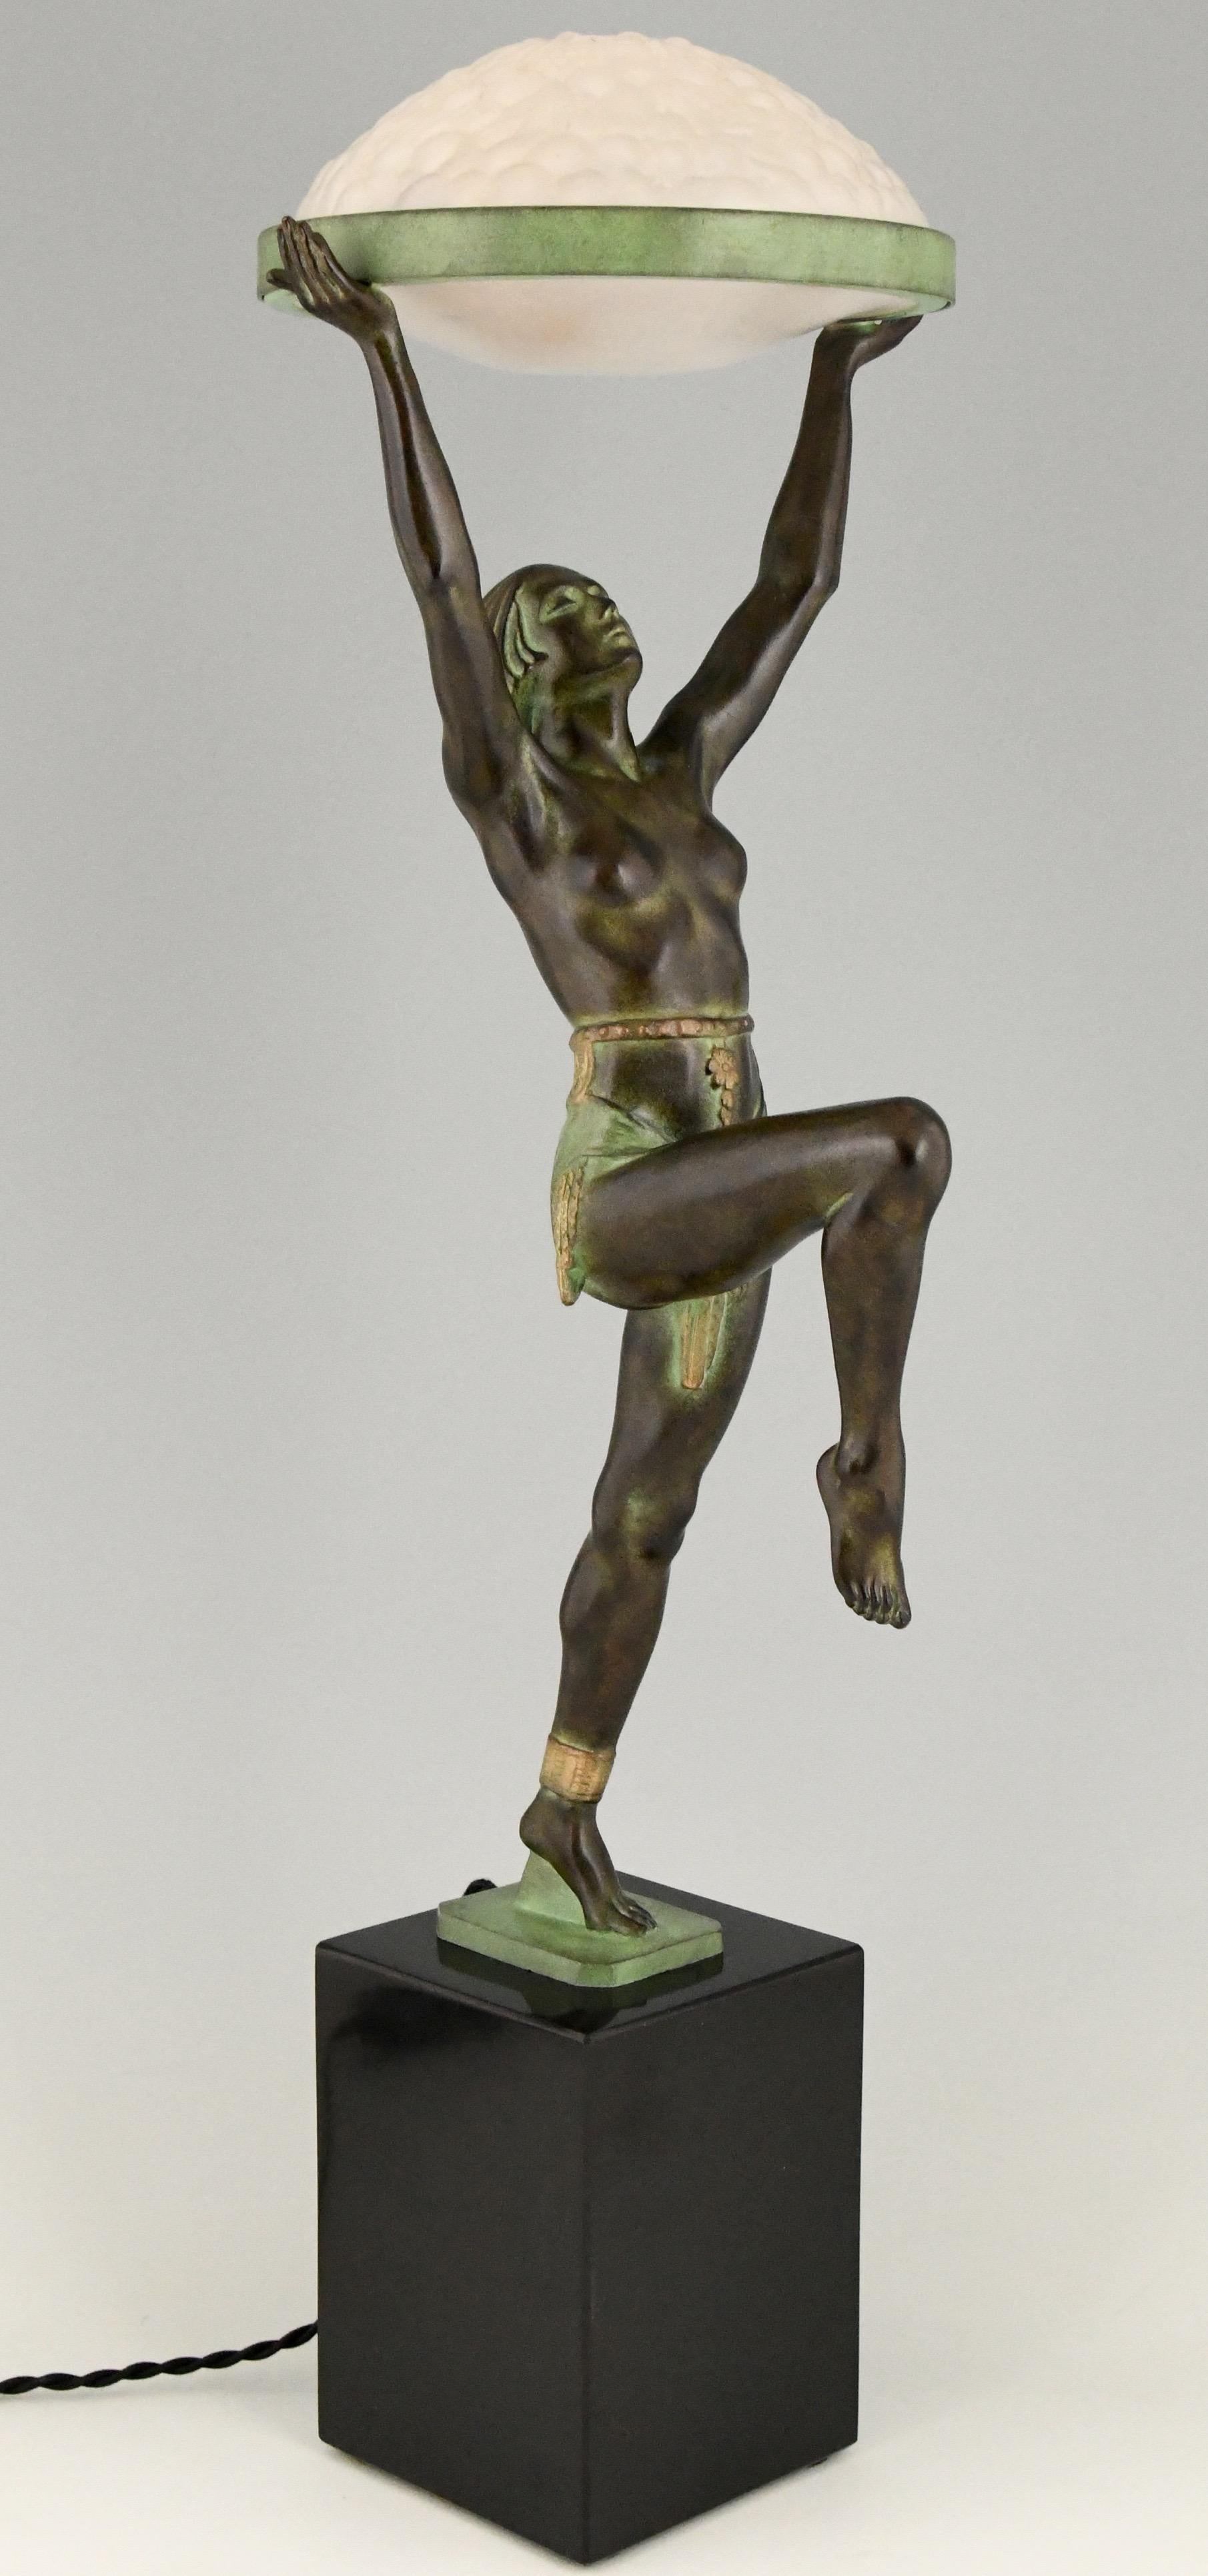 Metal Art Deco Style Table Lamp of a Dancer Holding a Glass Shade Max Le Verrier